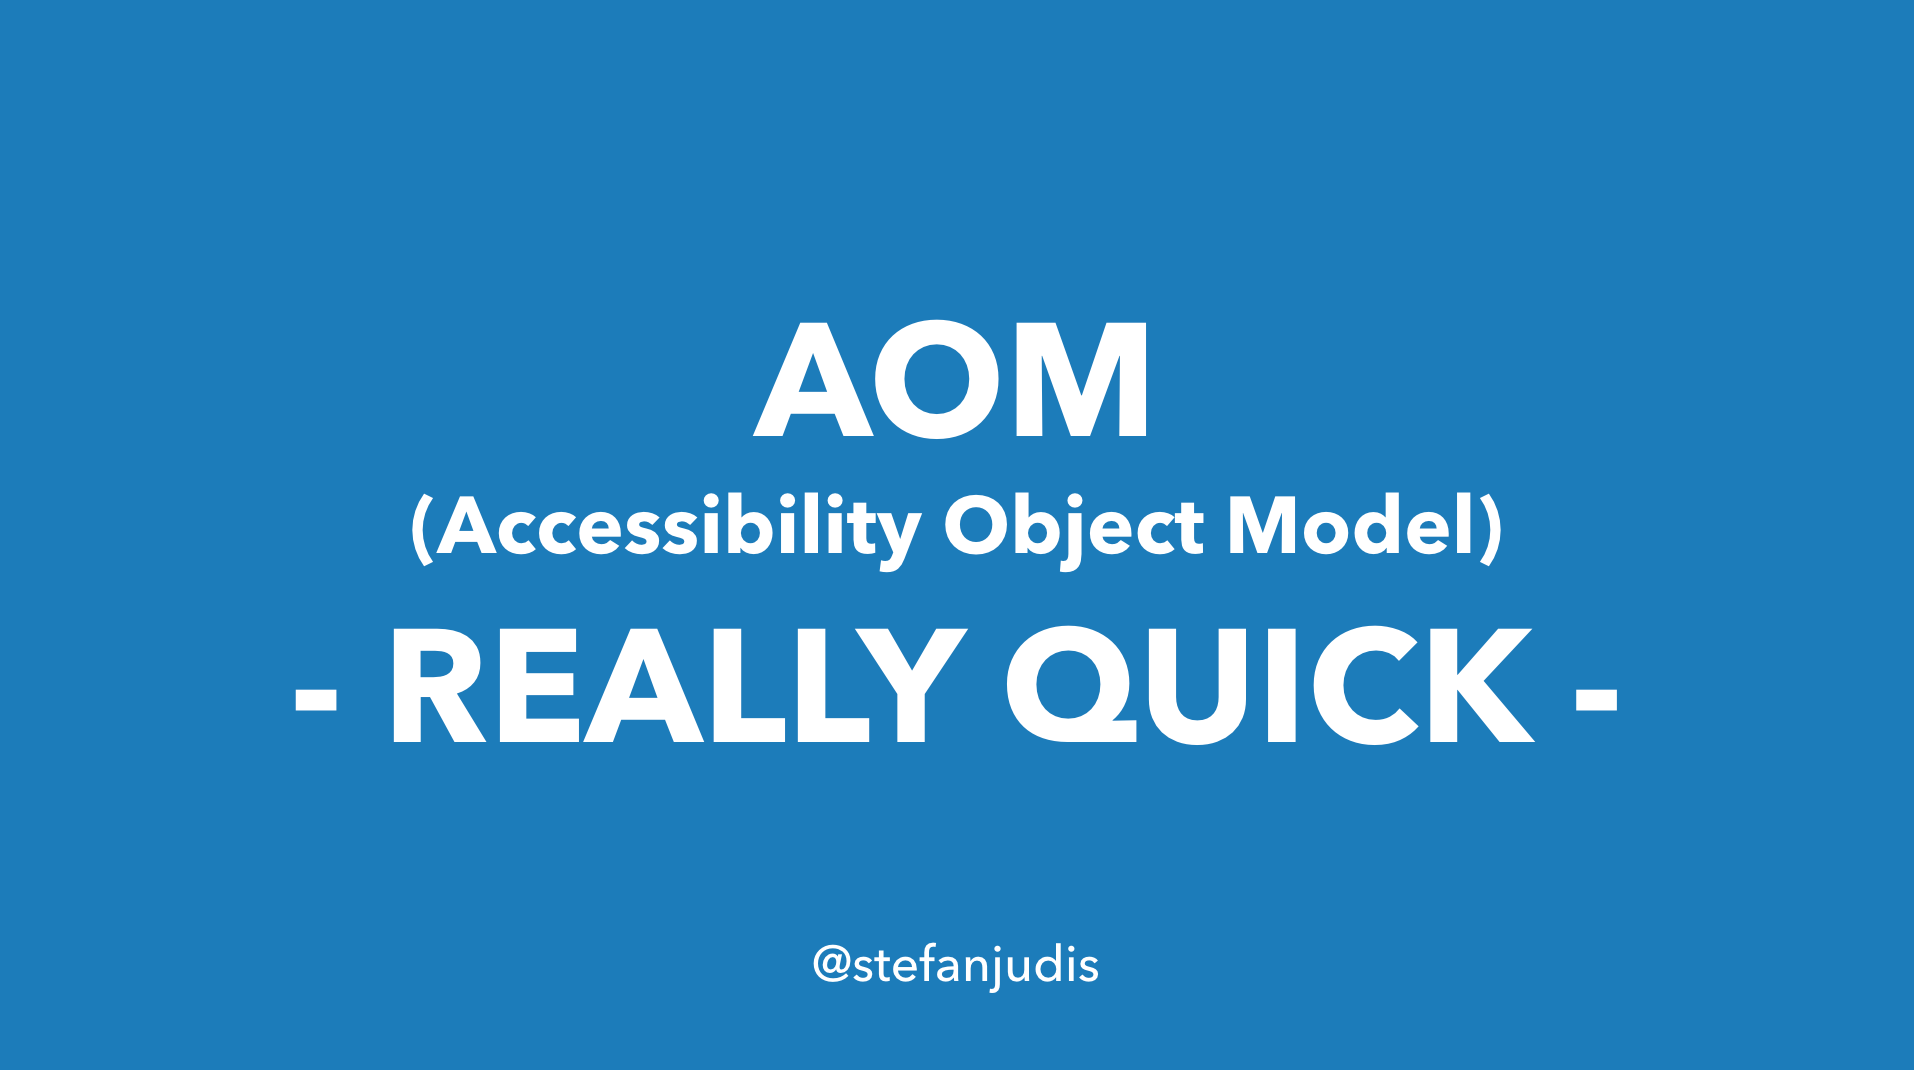 AOM (Accessibility Object Model) – really quick!